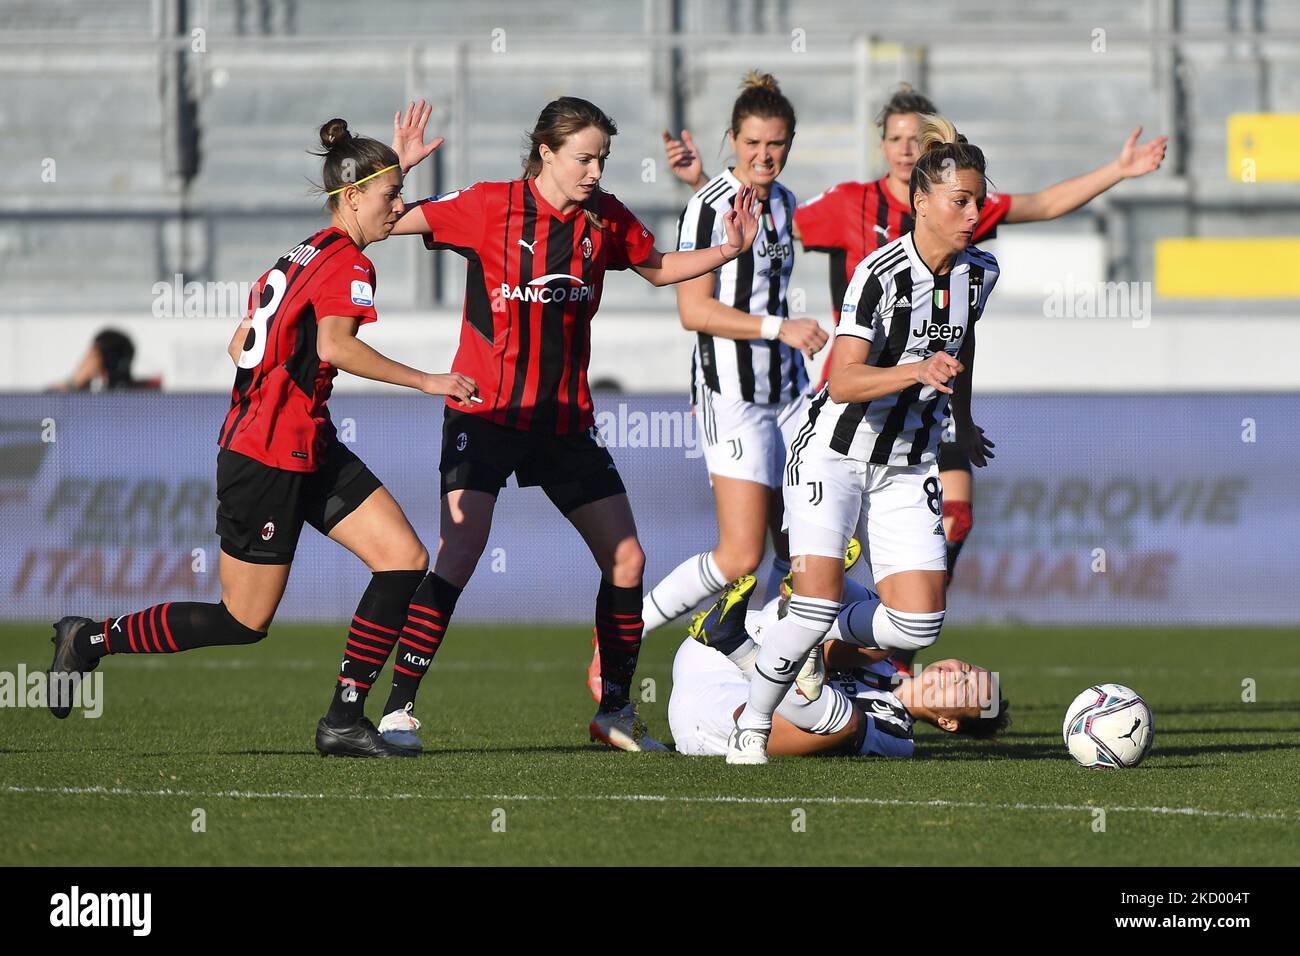 Martina Rosucci of Juventus Women during the Women's Italian Supercup Final  between F.C. Juventus and A.C. Milan at the Benito Stirpe Stadium on 8th of  January, 2022 in Frosinone, Italy. (Photo by